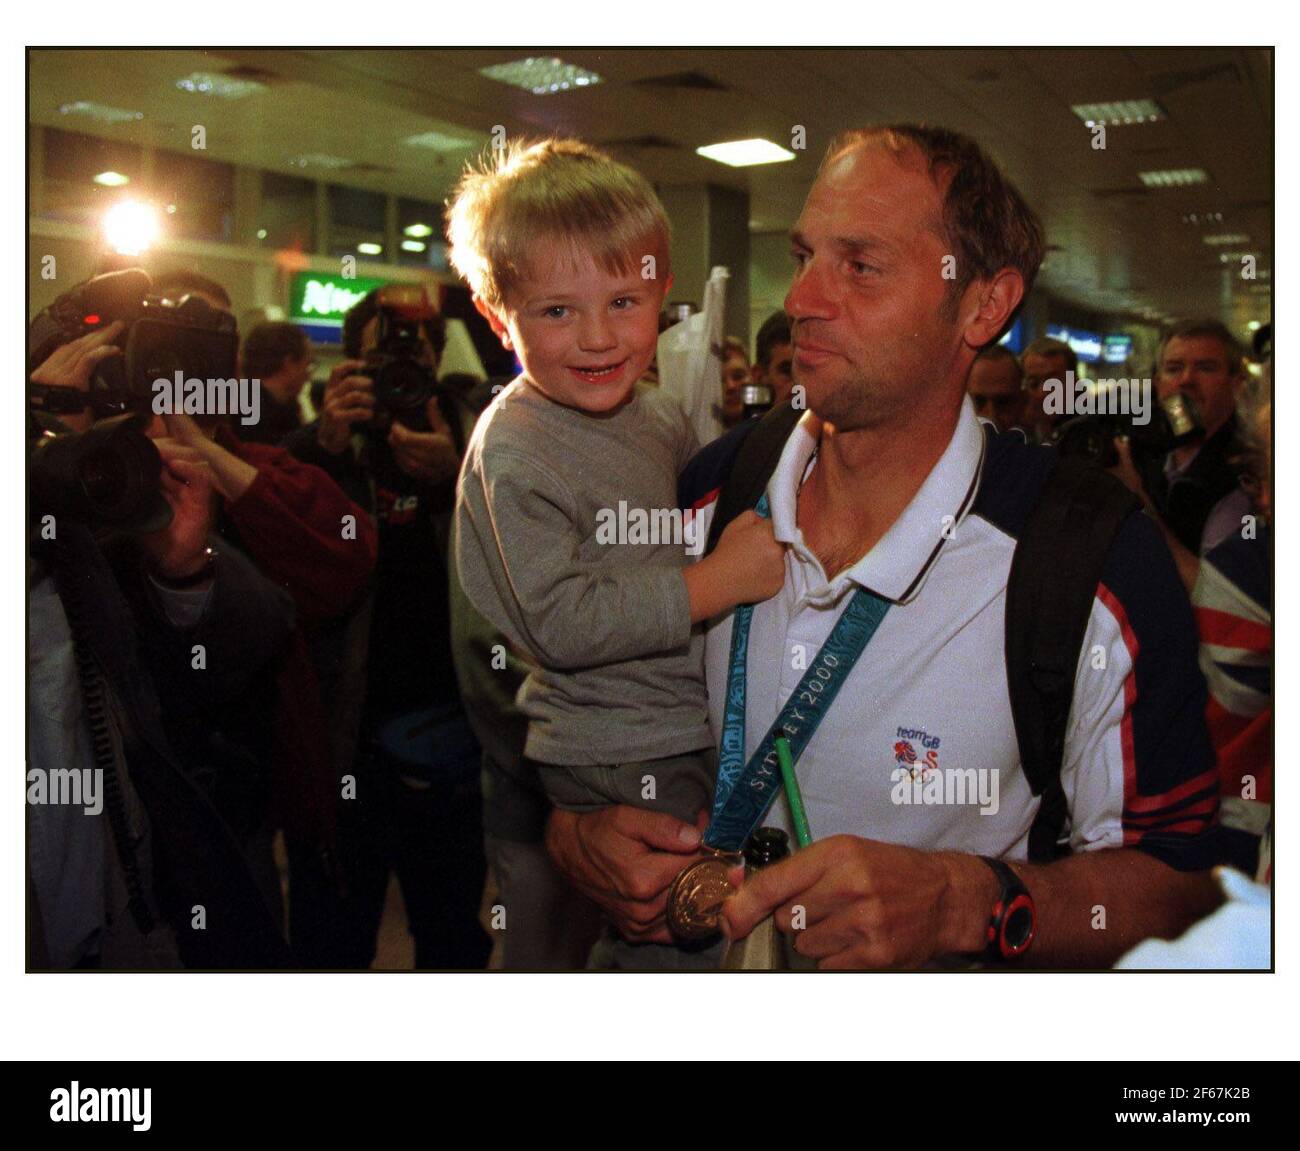 British Olympic Medalists arrive home at Heathrow airport....Steve Redgrave Coxless Four Rowing with son Zac Redgrave  Pic David Sandison Stock Photo